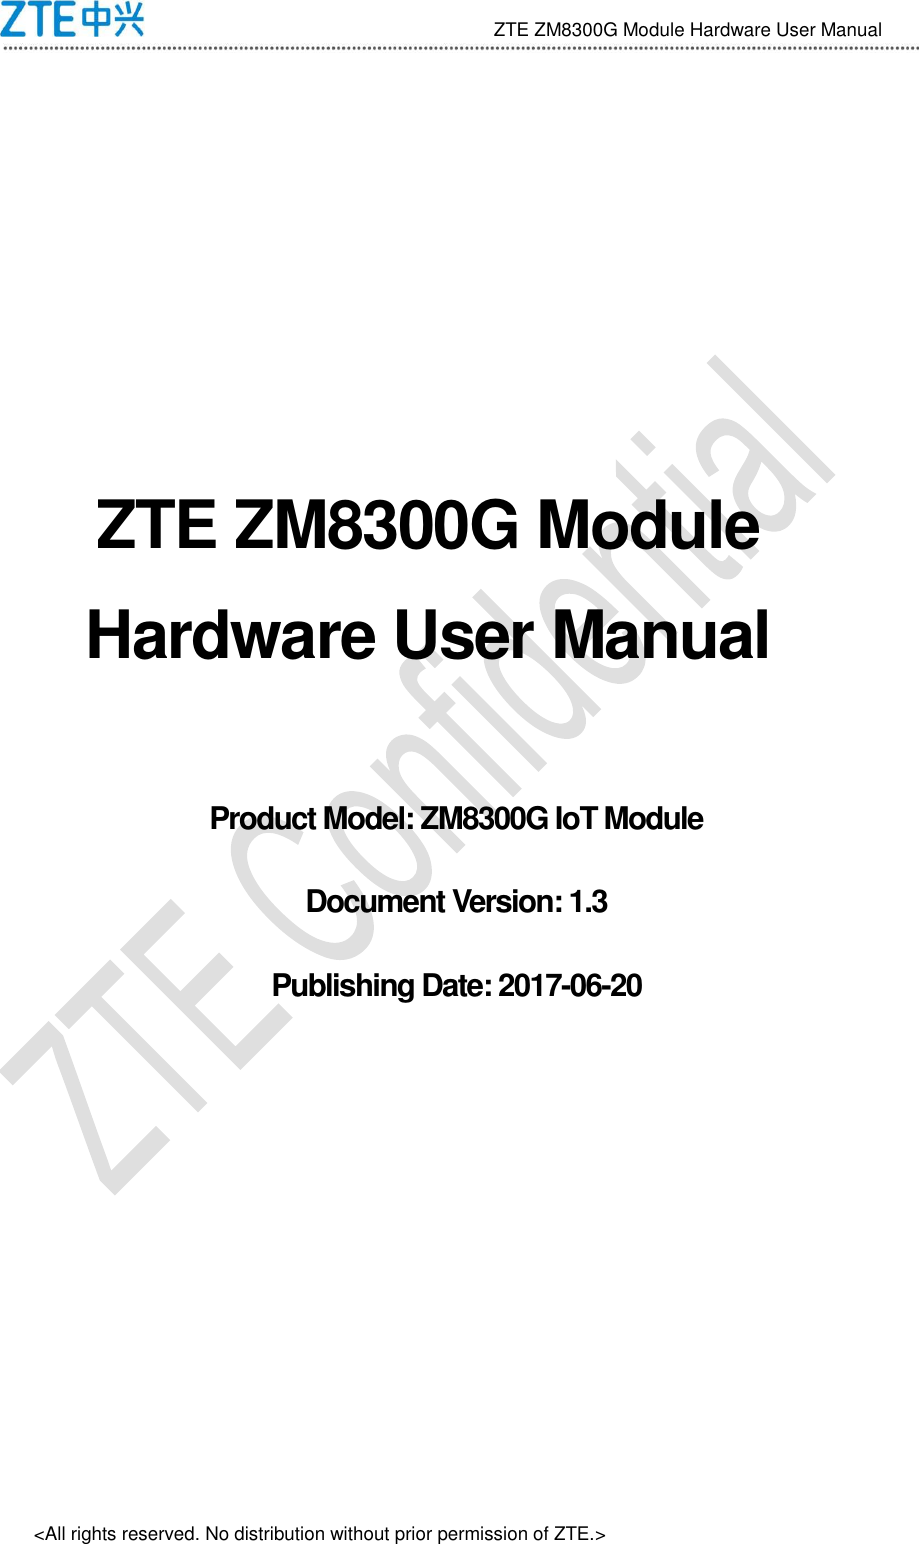                                 ZTE ZM8300G Module Hardware User Manual &lt;All rights reserved. No distribution without prior permission of ZTE.&gt;   ZTE ZM8300G Module Hardware User Manual  Product Model: ZM8300G IoT Module Document Version: 1.3 Publishing Date: 2017-06-20  